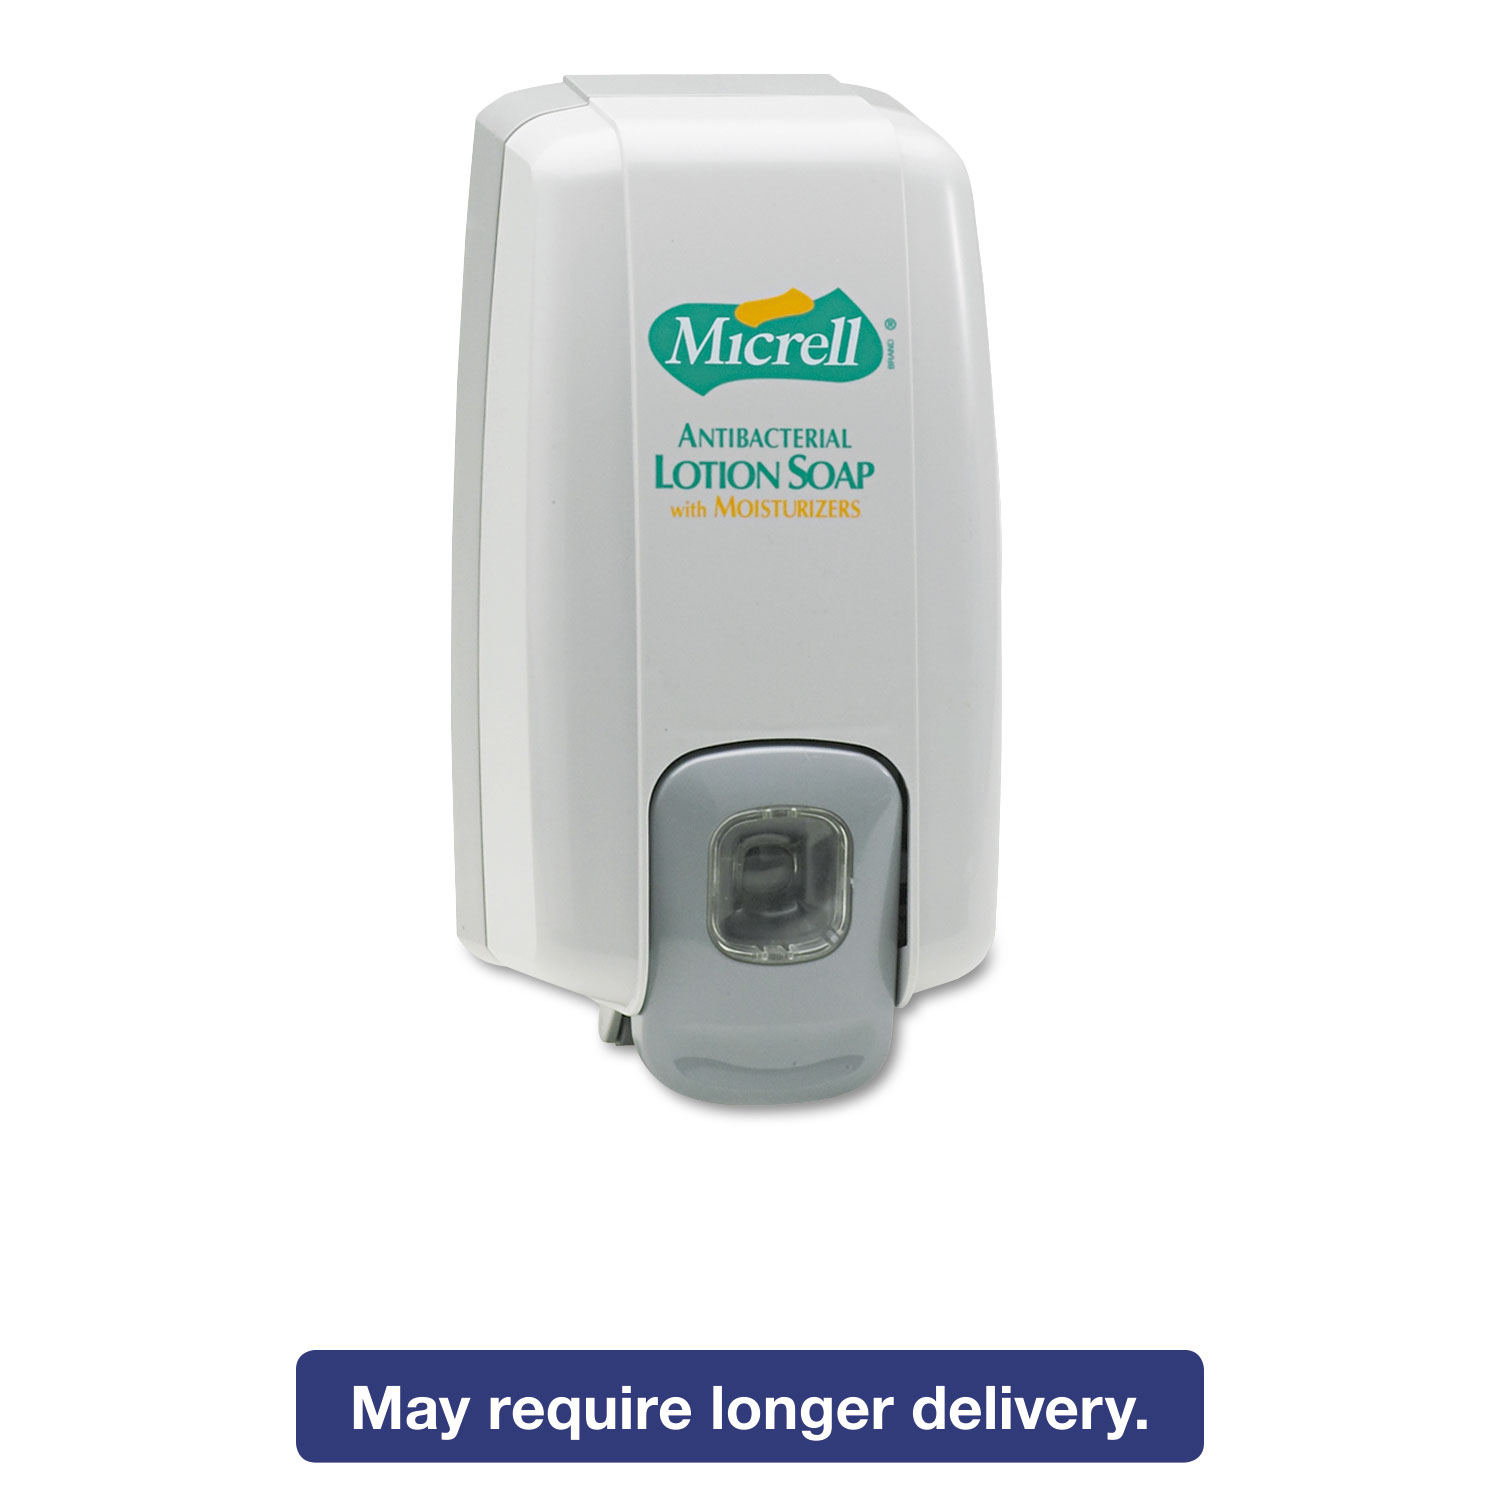 MICRELL NXT Antibacterial Lotion Soap Dispenser, 1000 mL, 5.13